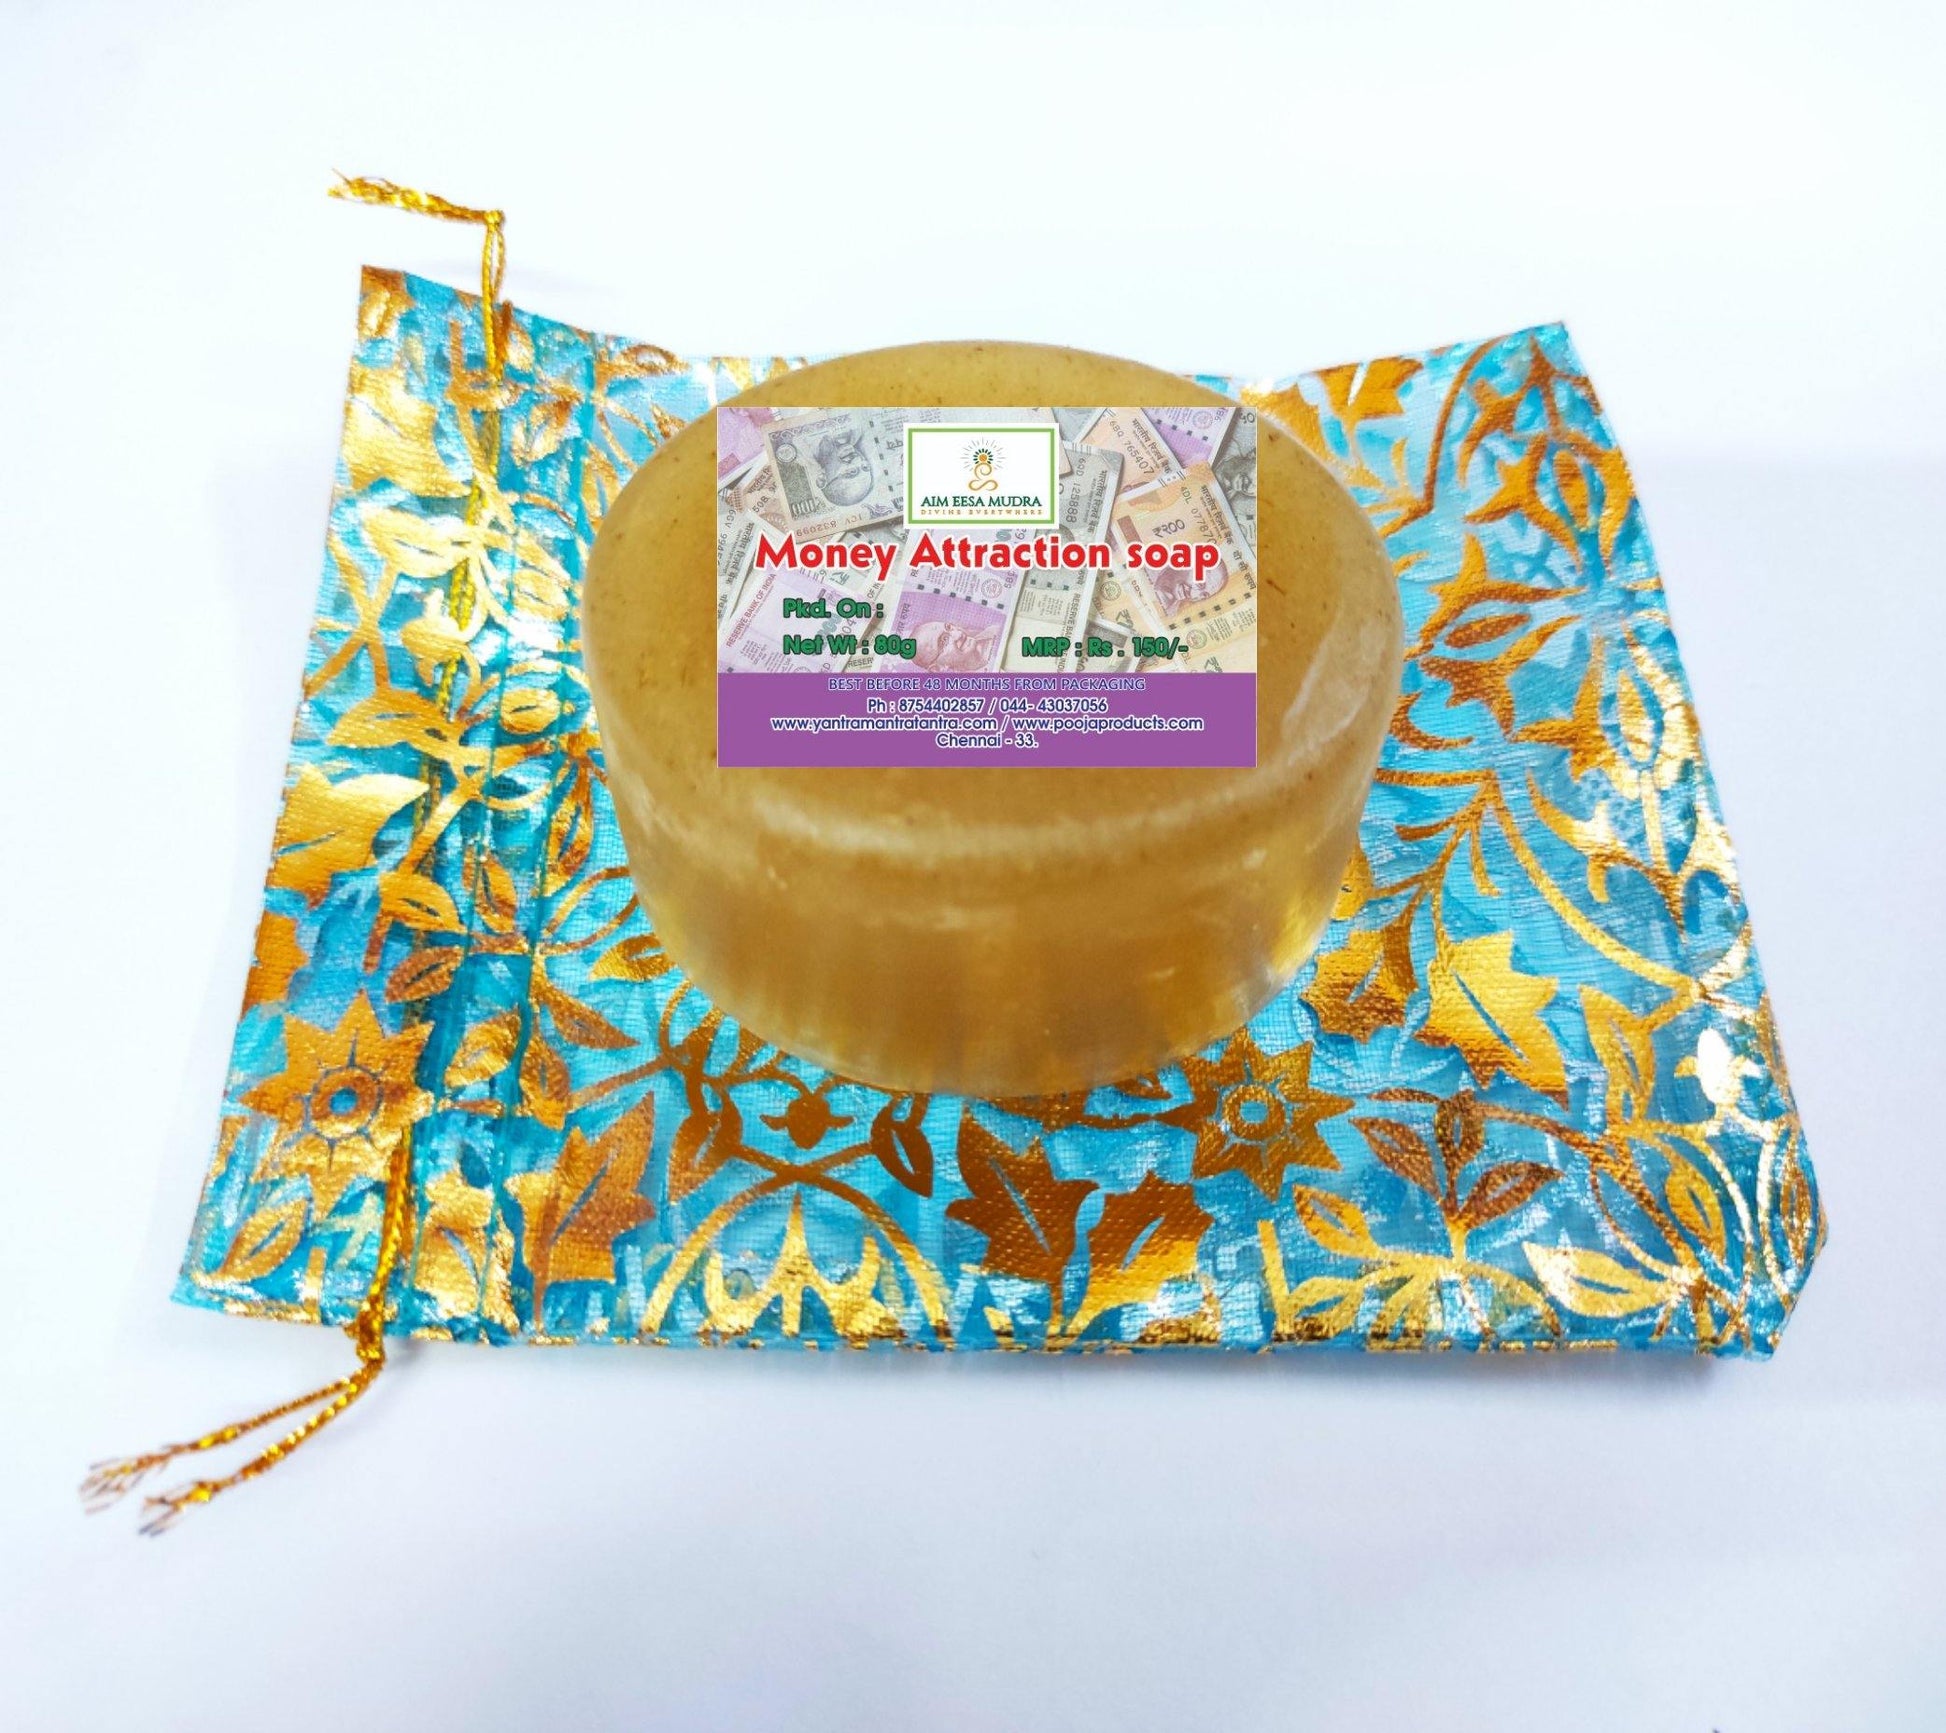 Money Attraction Soap - PoojaProducts.com